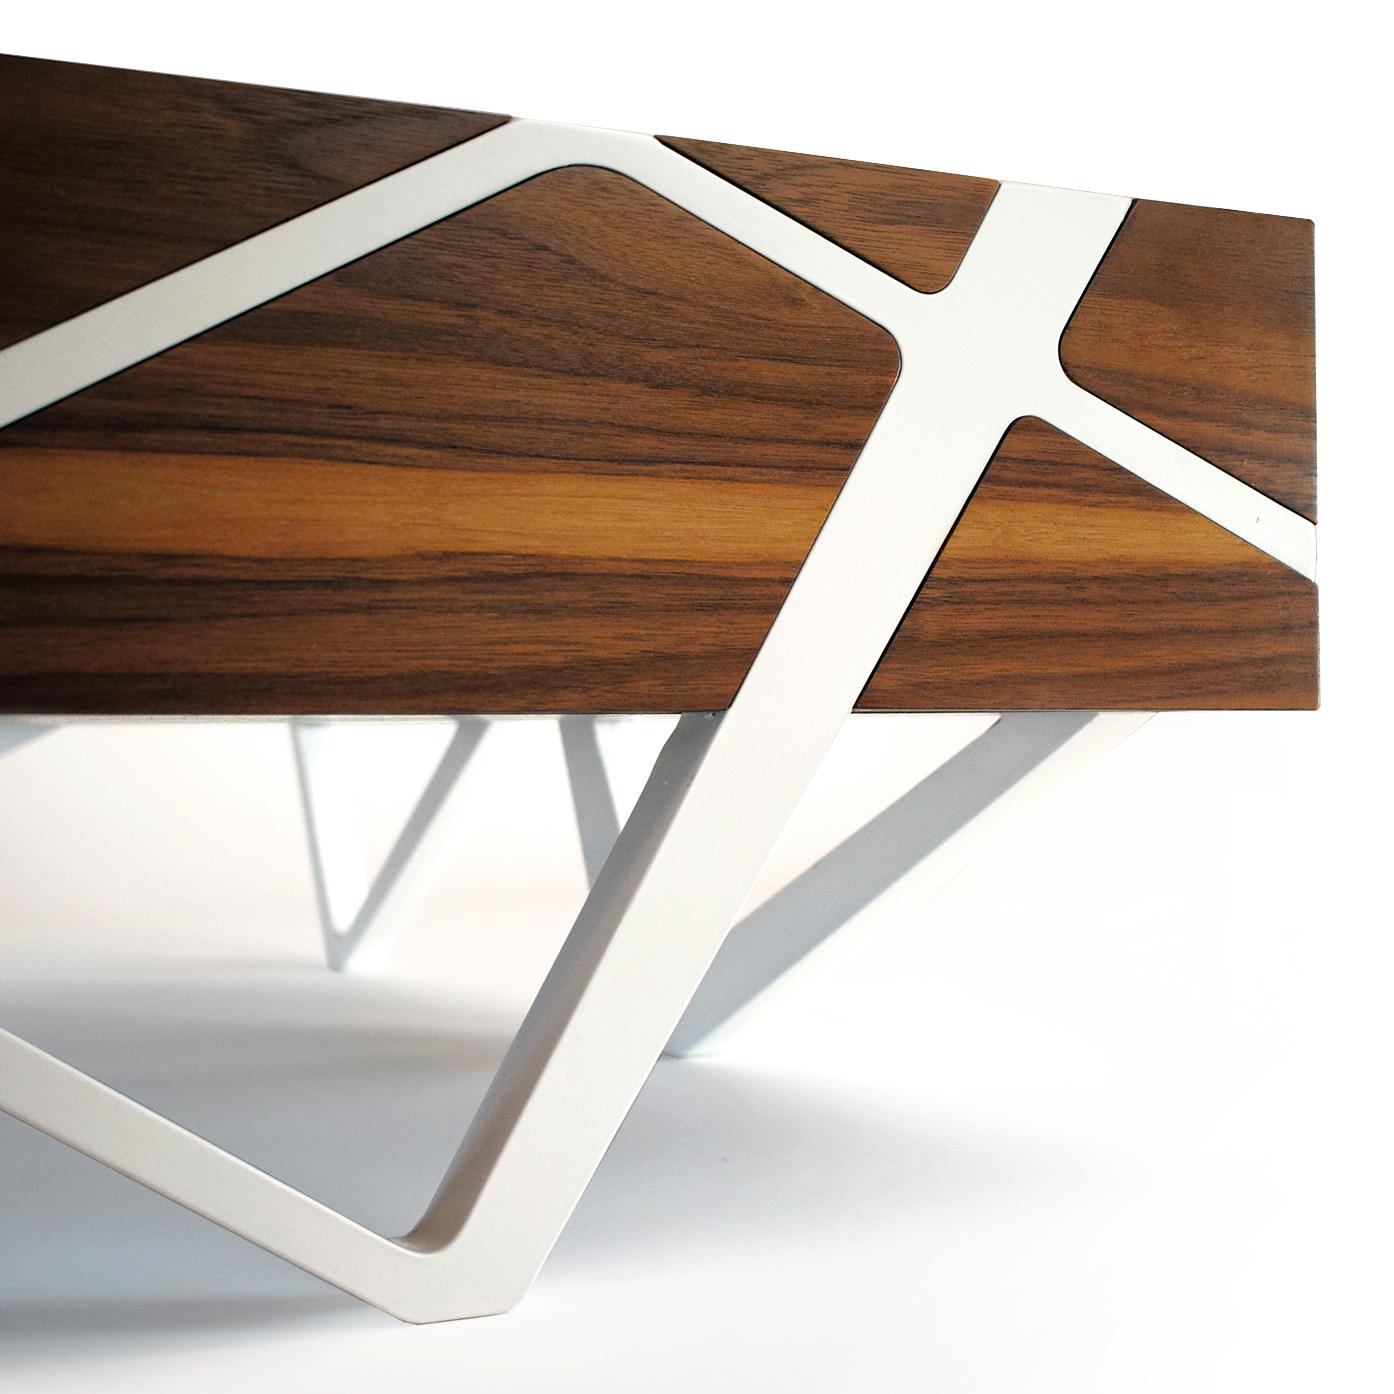 Hand-Crafted 21st Century Modern Center Coffee Table in Walnut Wood and White Showroom Sample